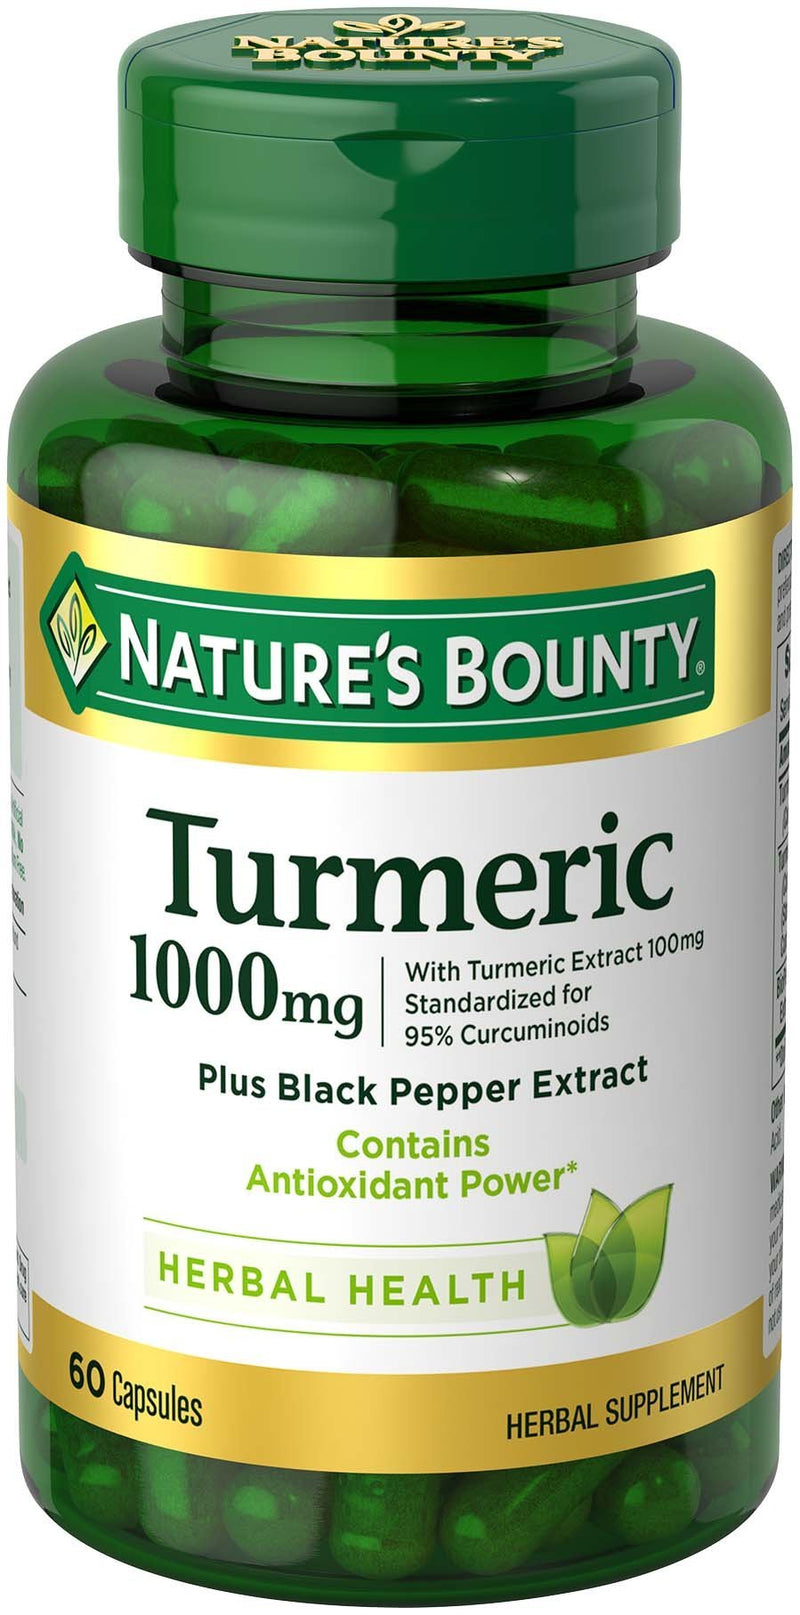 Nature's Bounty Turmeric Pills and Herbal Health Supplement, Supports Joint Pain Relief and Antioxidant Health, 1000 mg, 60 Count - BeesActive Australia